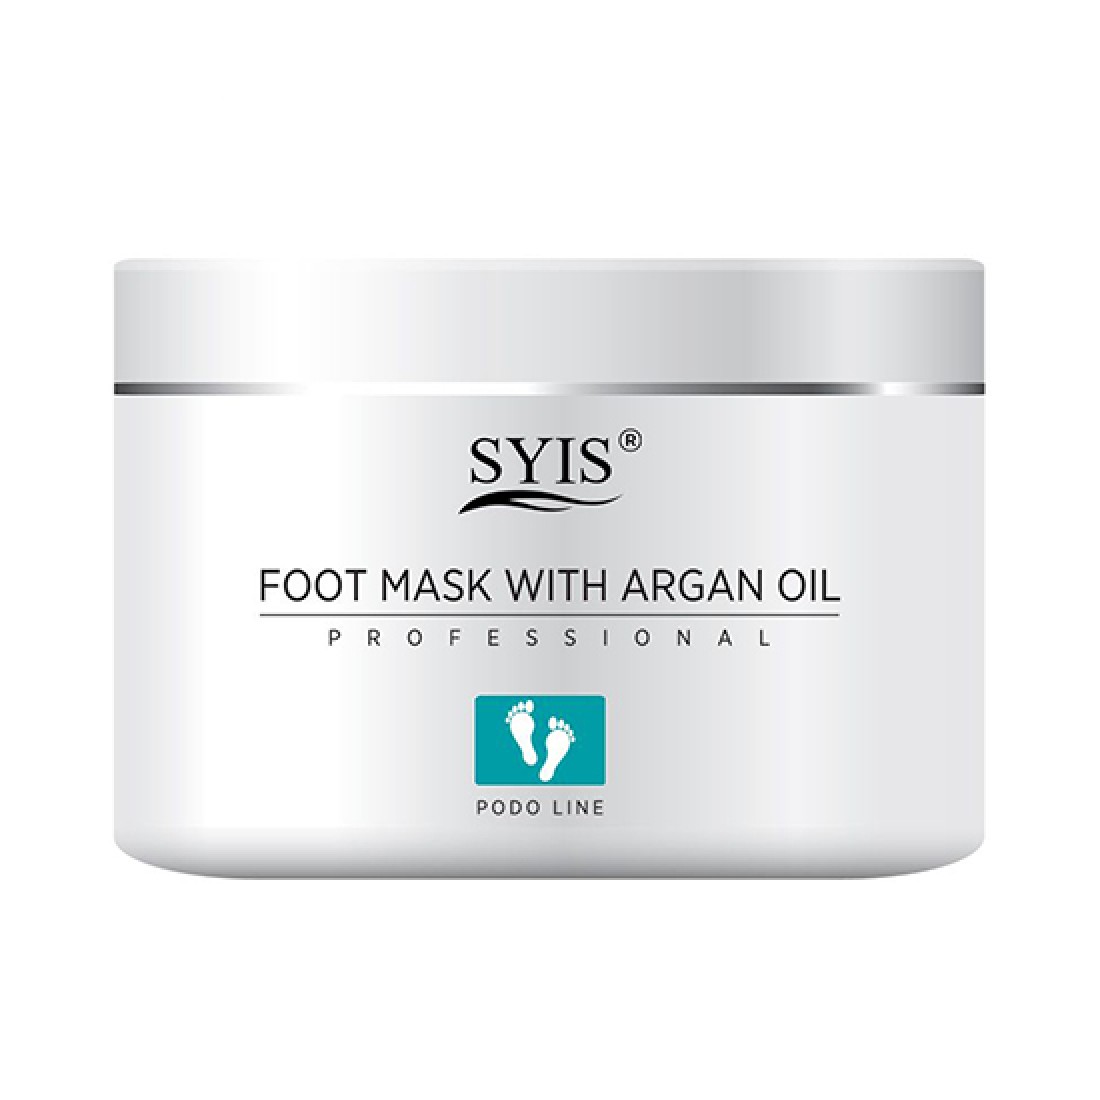 Syis Podo Line moisturizing Foot Mask with argan oil 500gr - 0108358 SPA FOOT TREATMENT & CALLUS REMOVER 